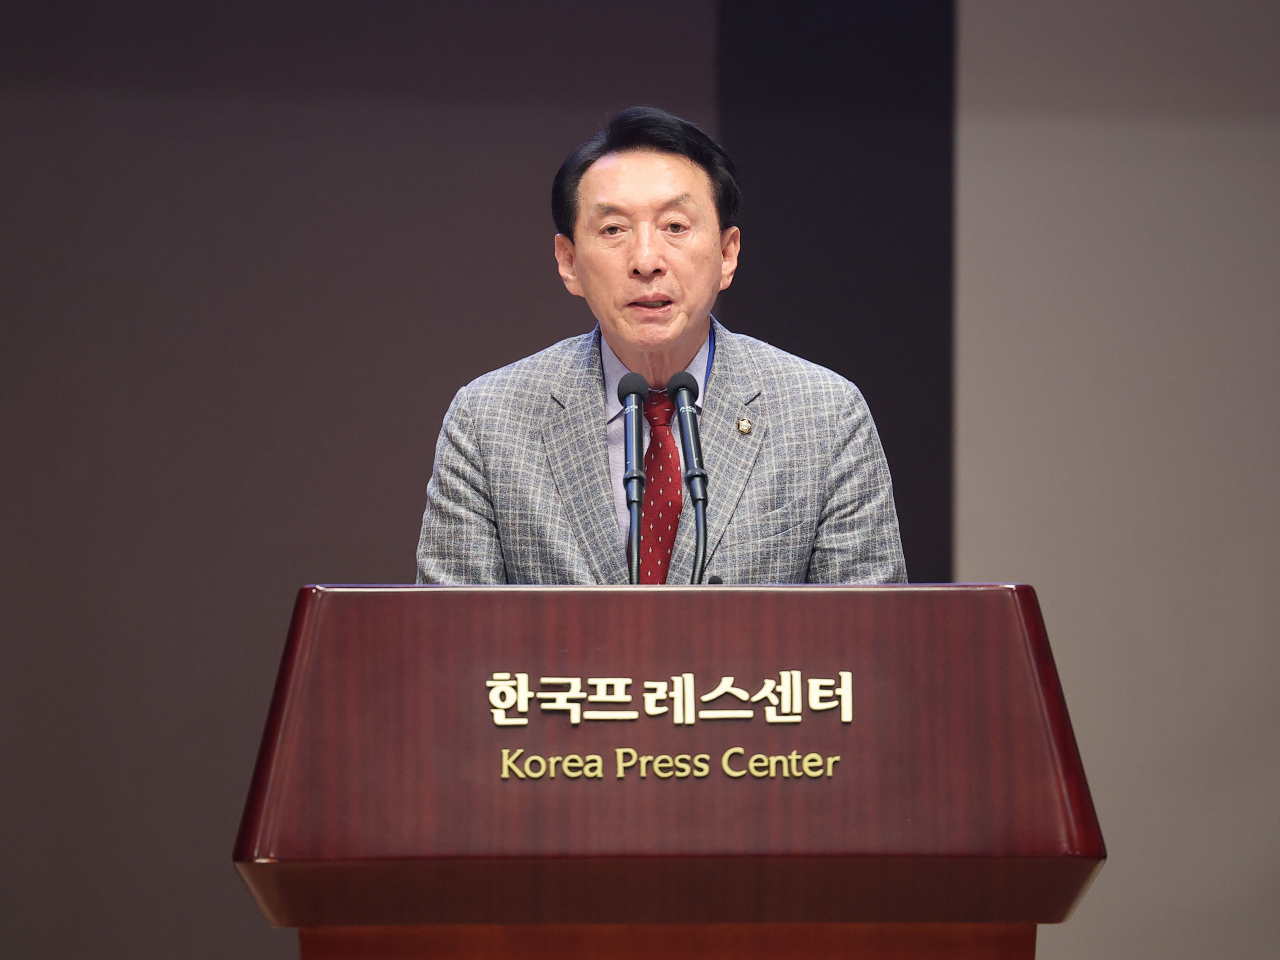 Rep. Kim Seok-ki, the ruling party’s executive secretary for the National Assembly foreign affairs committee, speaks during an event at the Korea Press Center on April 24. (Yonhap)